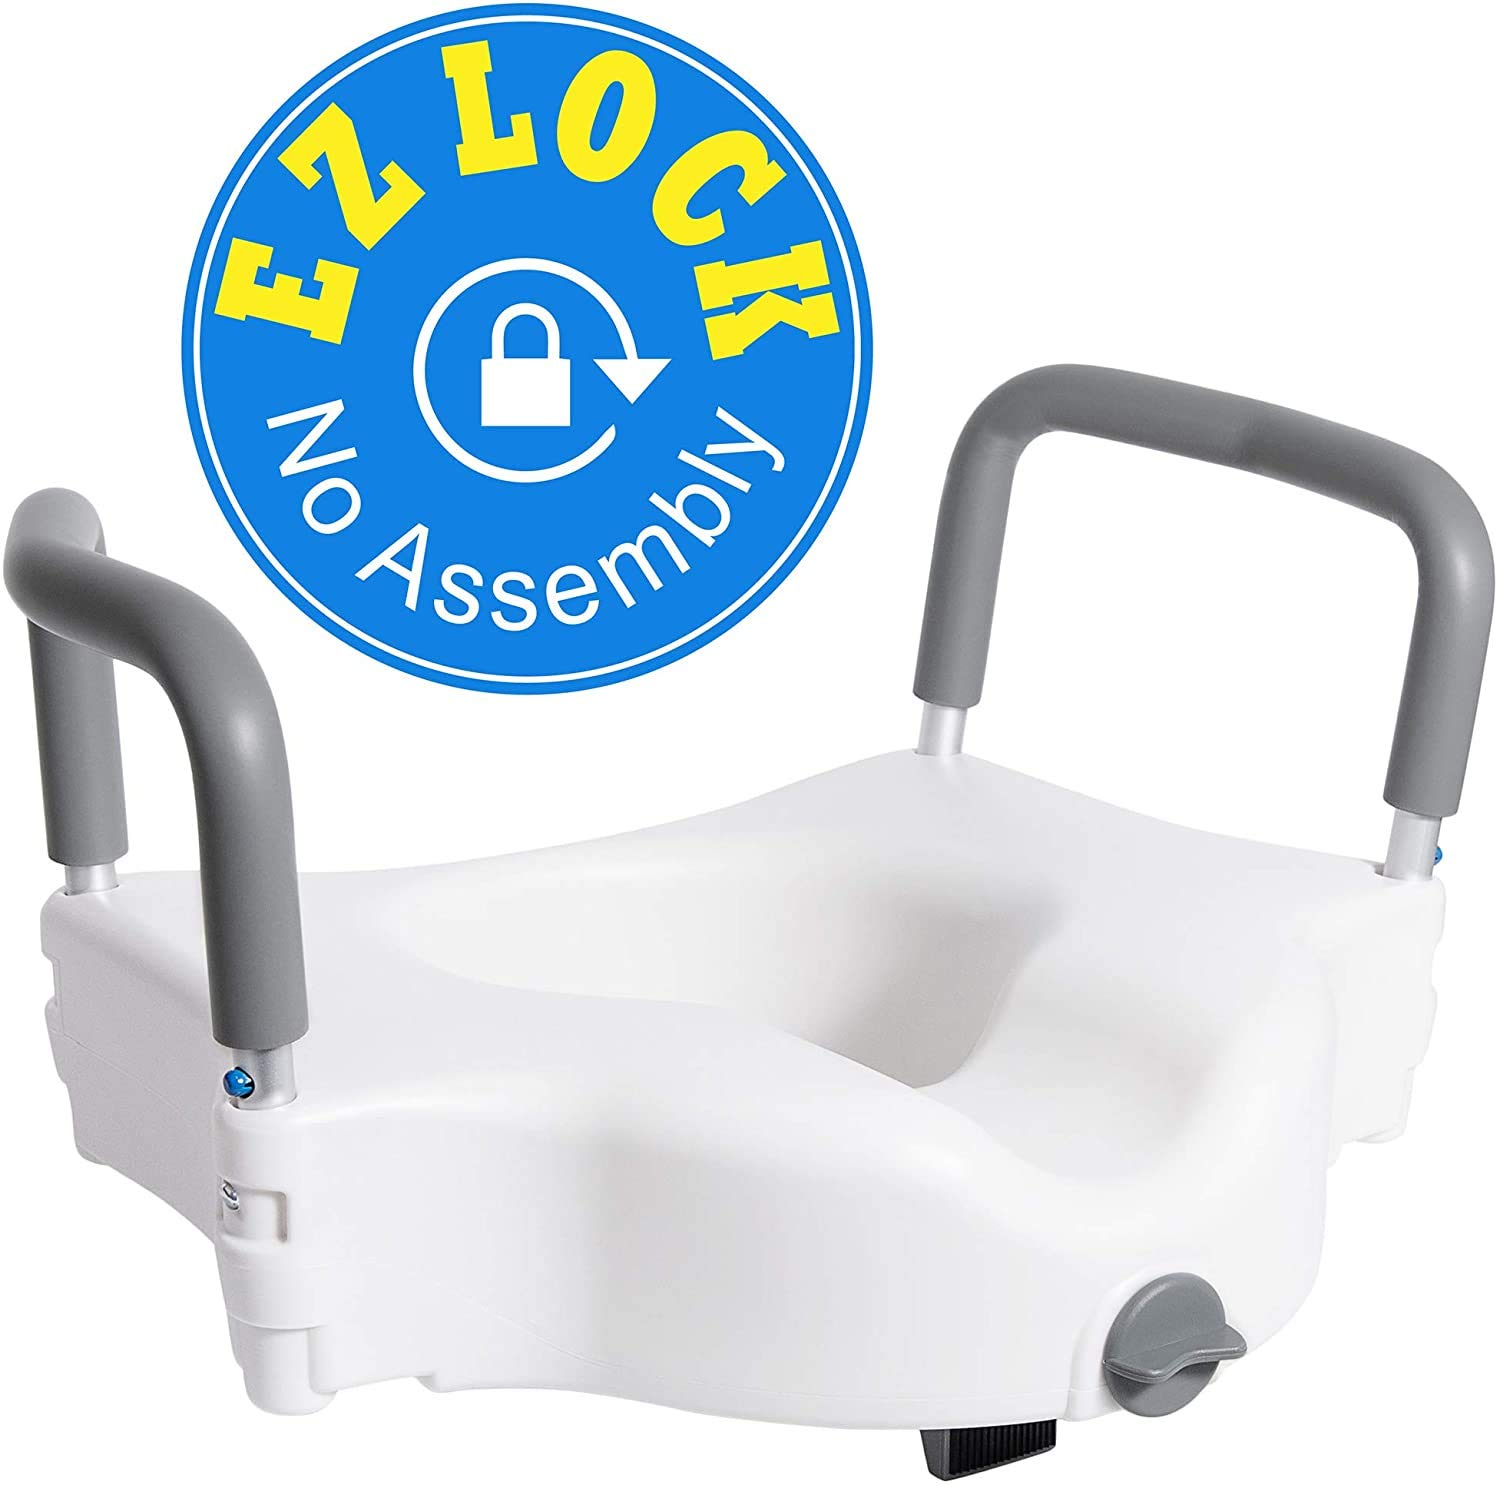 Vaunn Raised Toilet Seat and Elevated Commode Booster Seat Riser with Removable Padded Grab bar Handles & Locking Mechanism